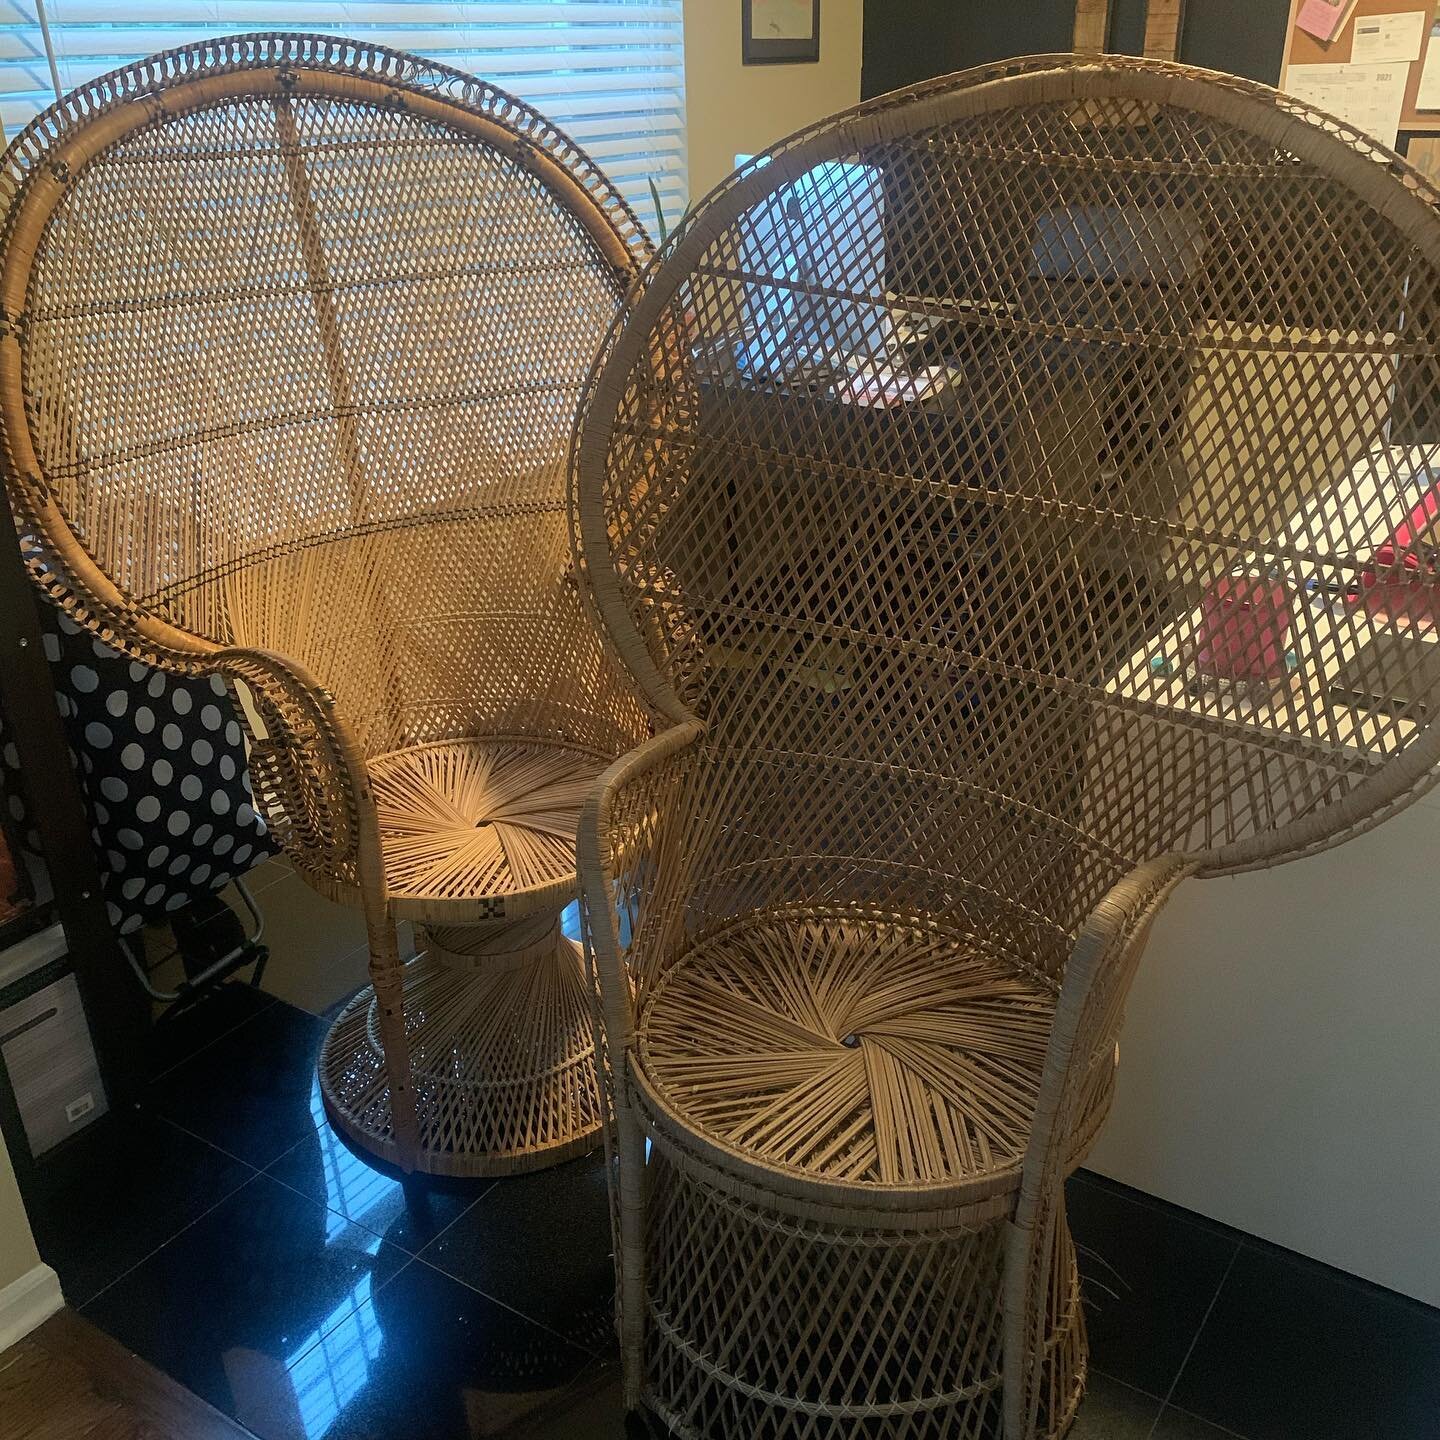 There will be a lot of Juneteenth events tomorrow in Metro Detroit, I promise we will be the only one that has Rattan Wicker chairs available to take pictures in. Come out and support the vendors and food trucks and take a pic! #juneteenthfamilyreuni